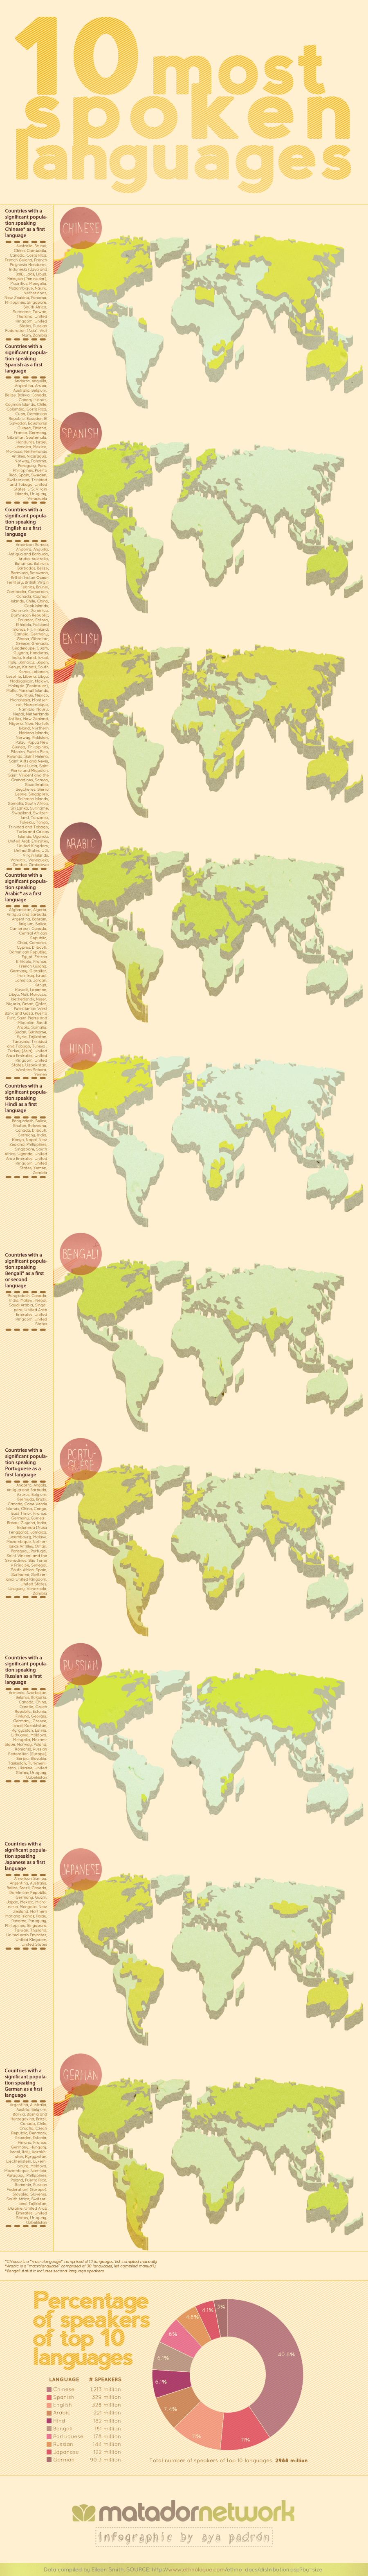 Where are the world’s most common languages spoken? [Infographic]